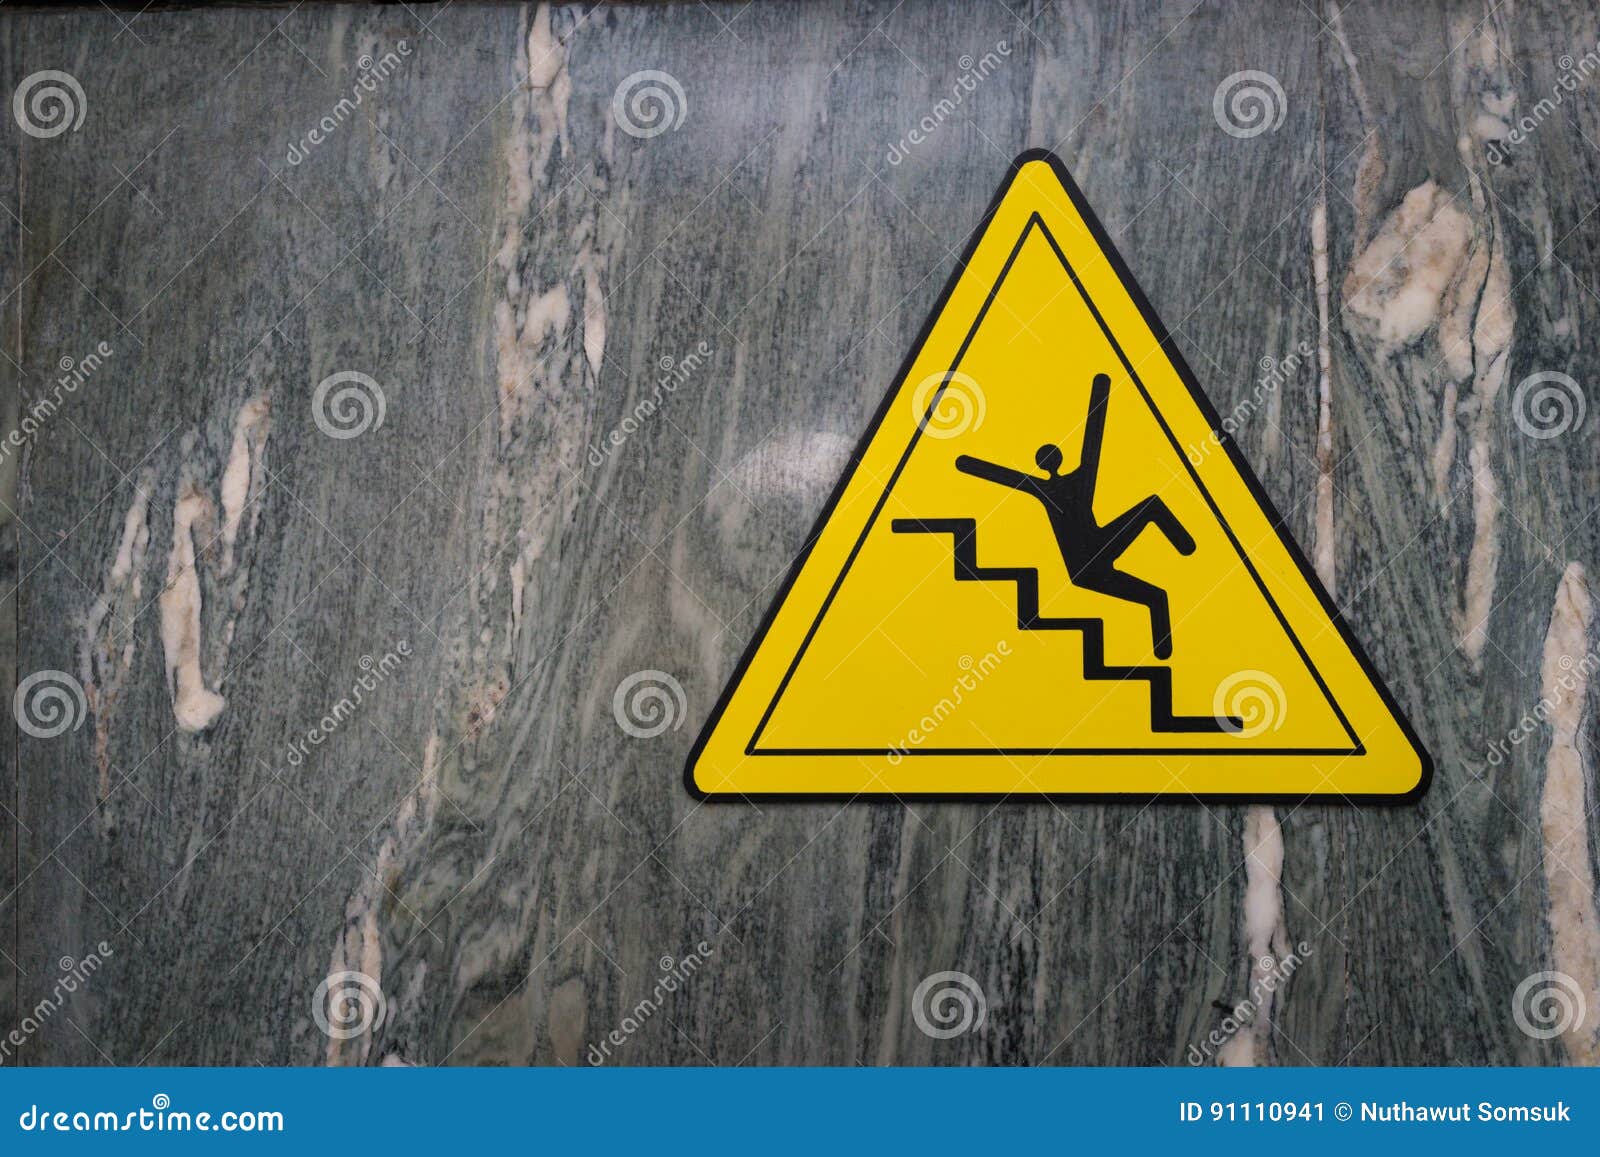 sign of danger of falling stairs slip warning caution on marble